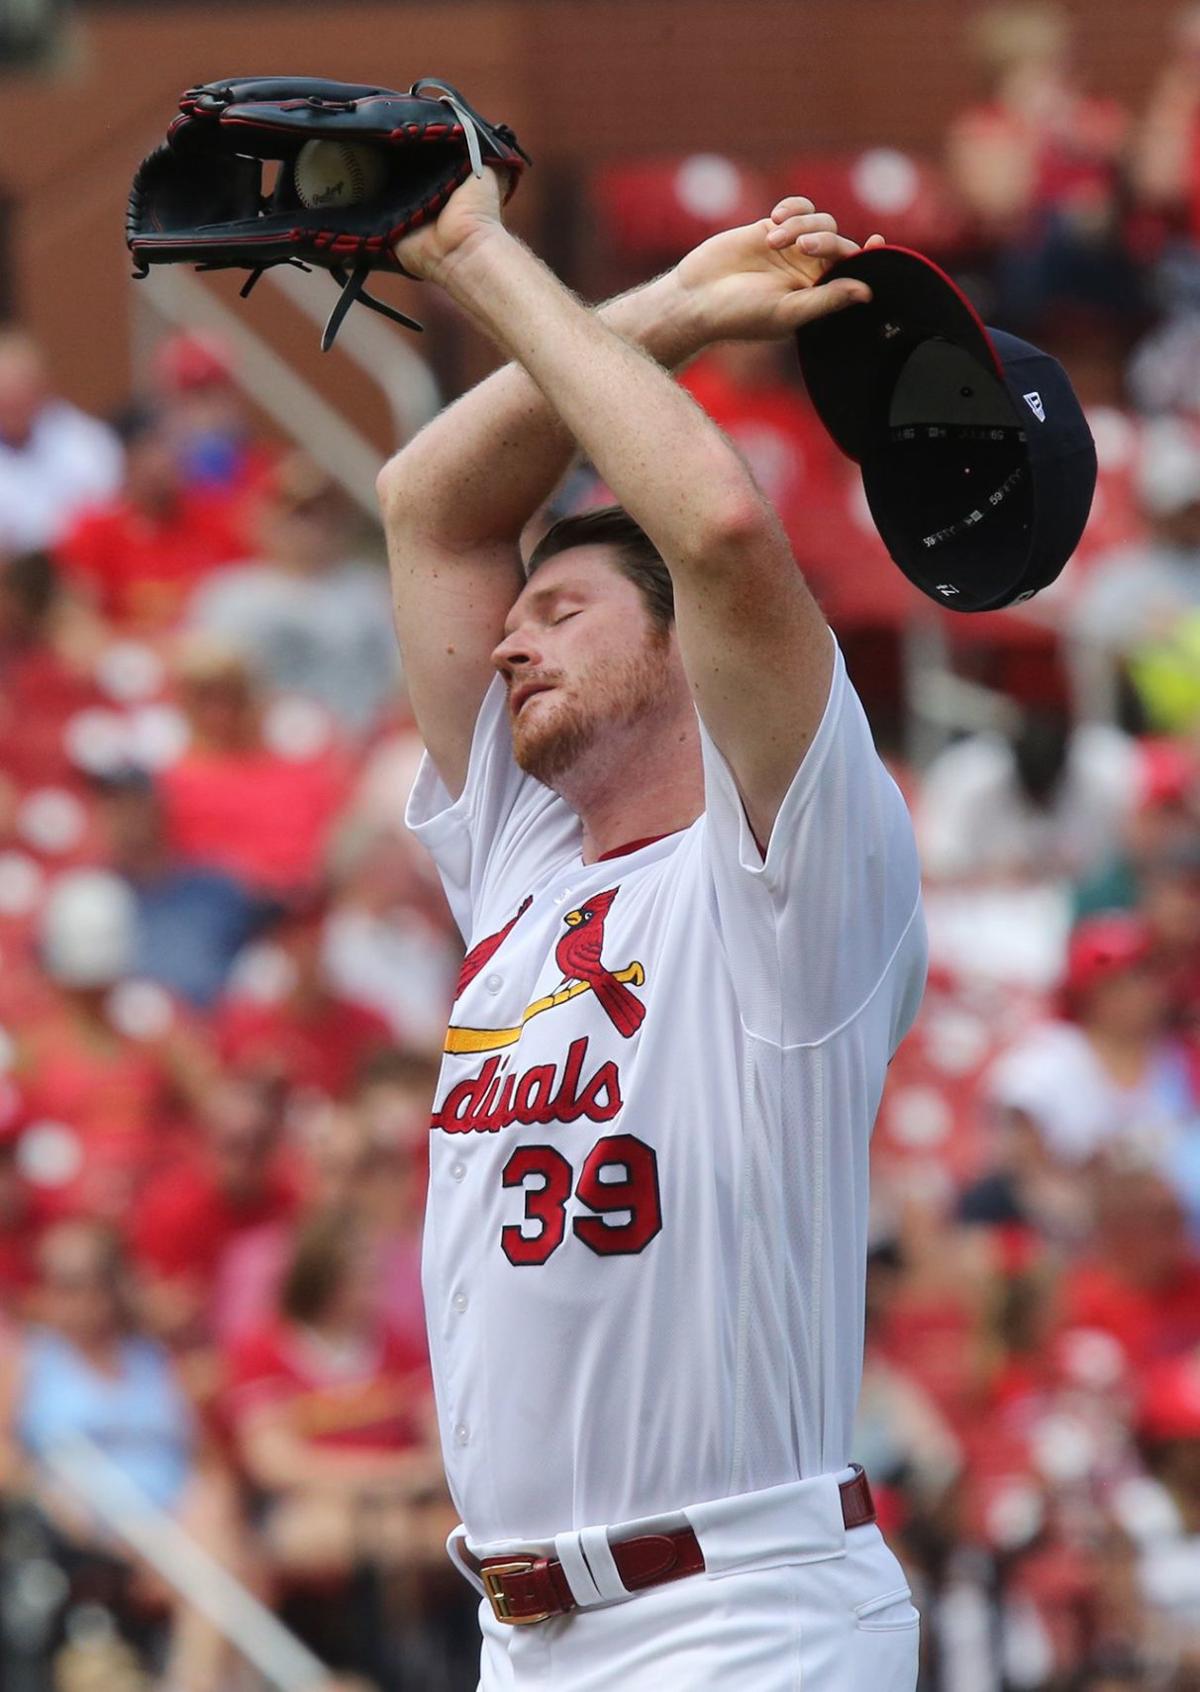 New Cardinals manager Shildt gets first win — and a dousing | St. Louis Cardinals | www.ermes-unice.fr